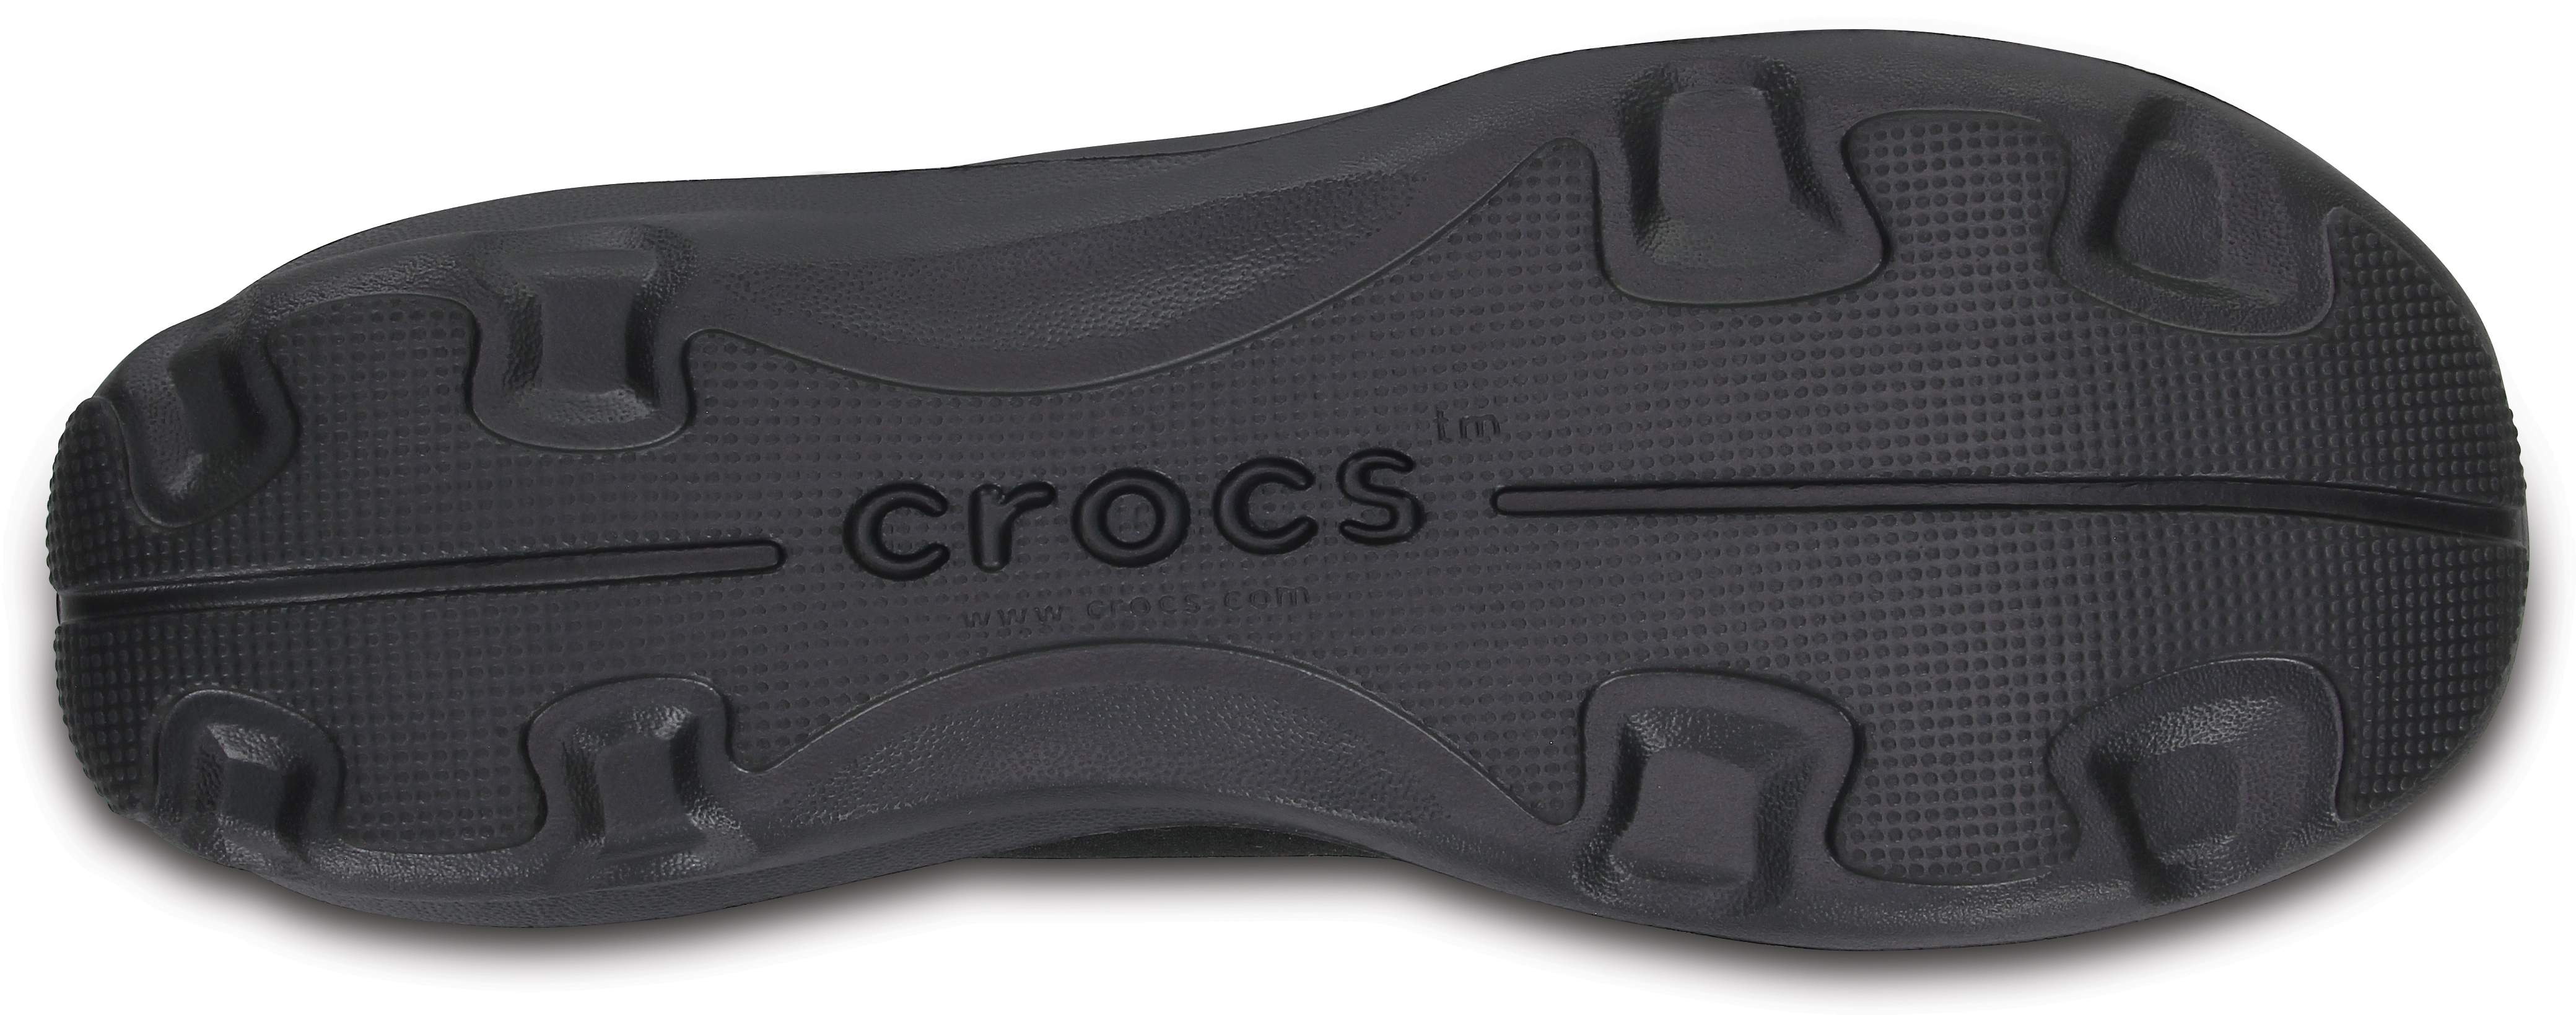 crocs busy day lace up